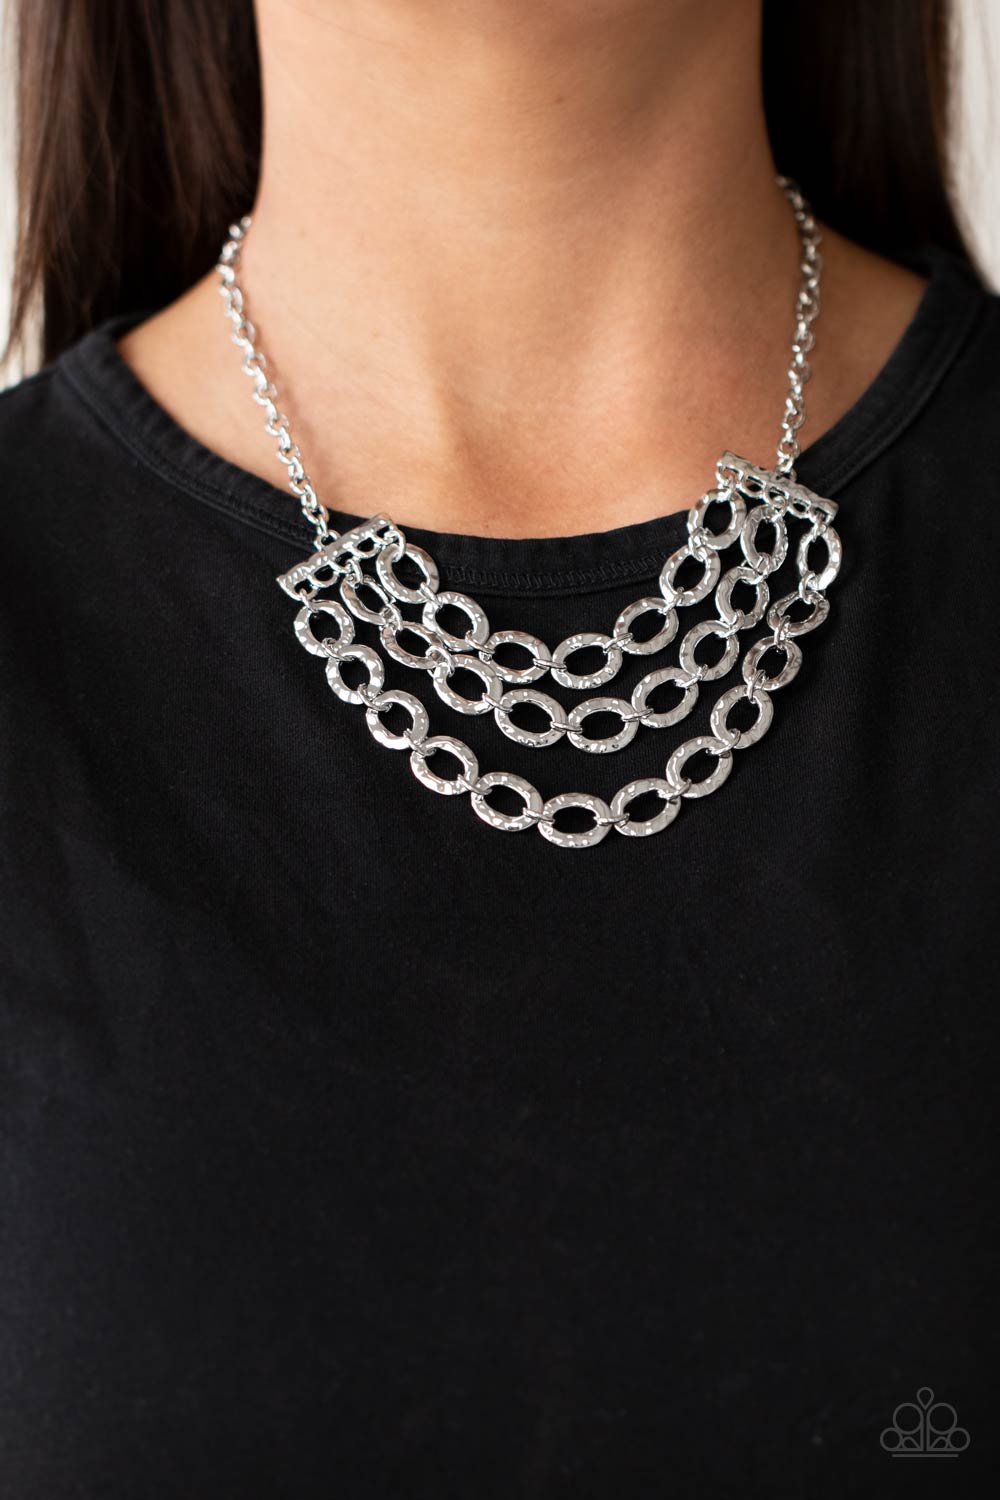 Repeat After Me Silver Necklace - Paparazzi Accessories  Three rows of shiny silver chains with oversized hammered oval links attach to silver bars for an edgy display below the collar. Features an adjustable clasp closure.  All Paparazzi Accessories are lead free and nickel free!   Sold as one individual necklace. Includes one pair of matching earrings.